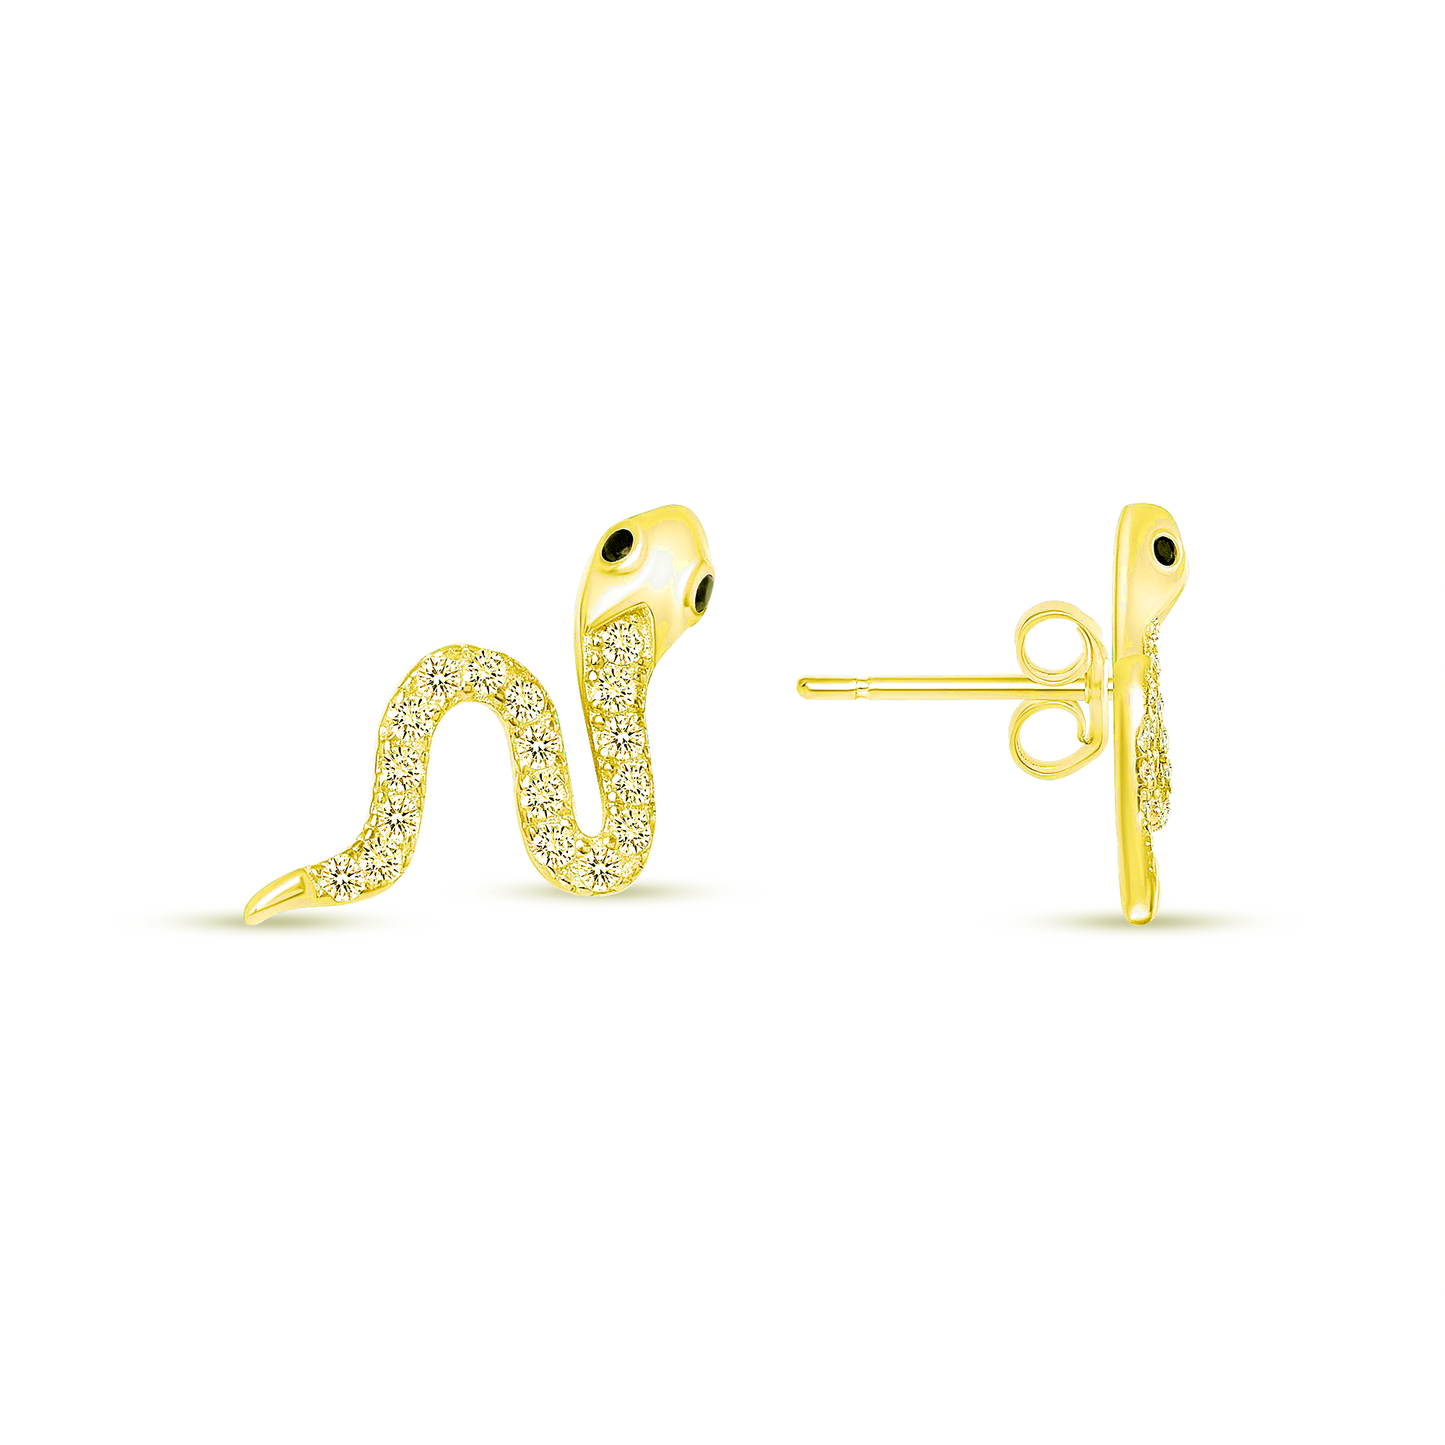 Silver 925 Gold Plated Cubic Zirconia Snake Earring. DGE1630GP